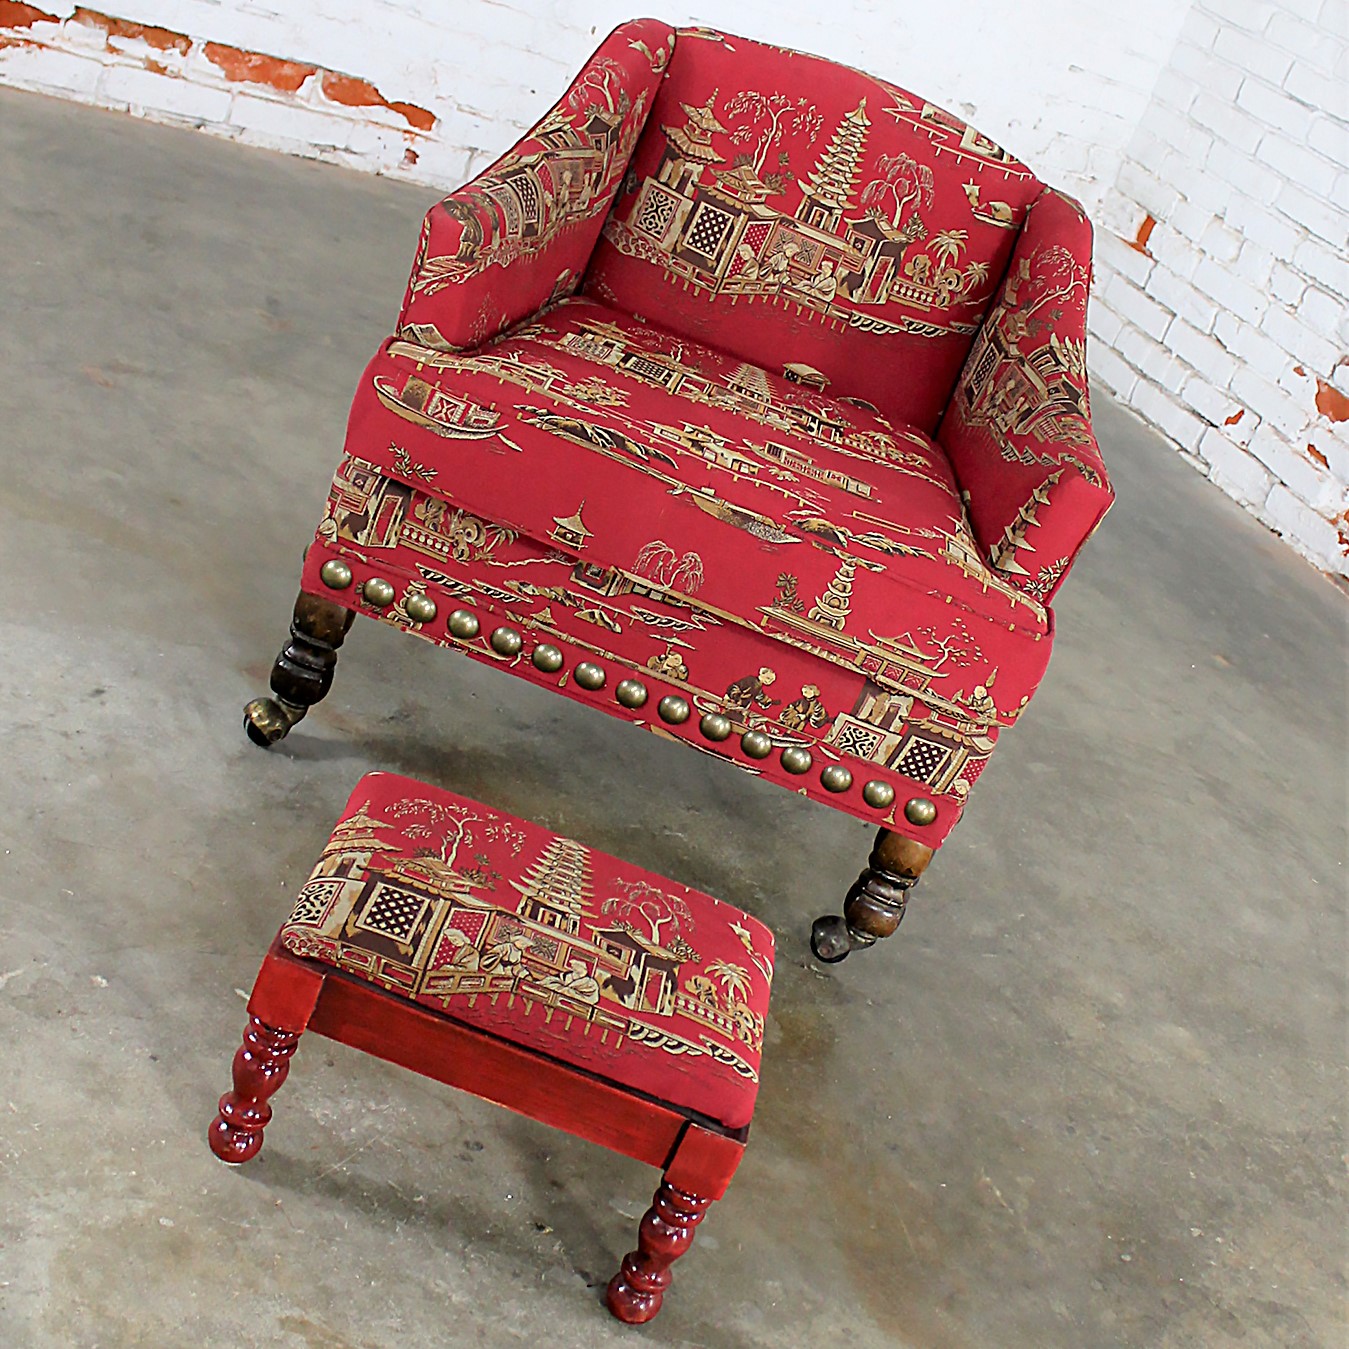 Vintage Petite Red Chinoiserie Armchair and Cricket Footstool